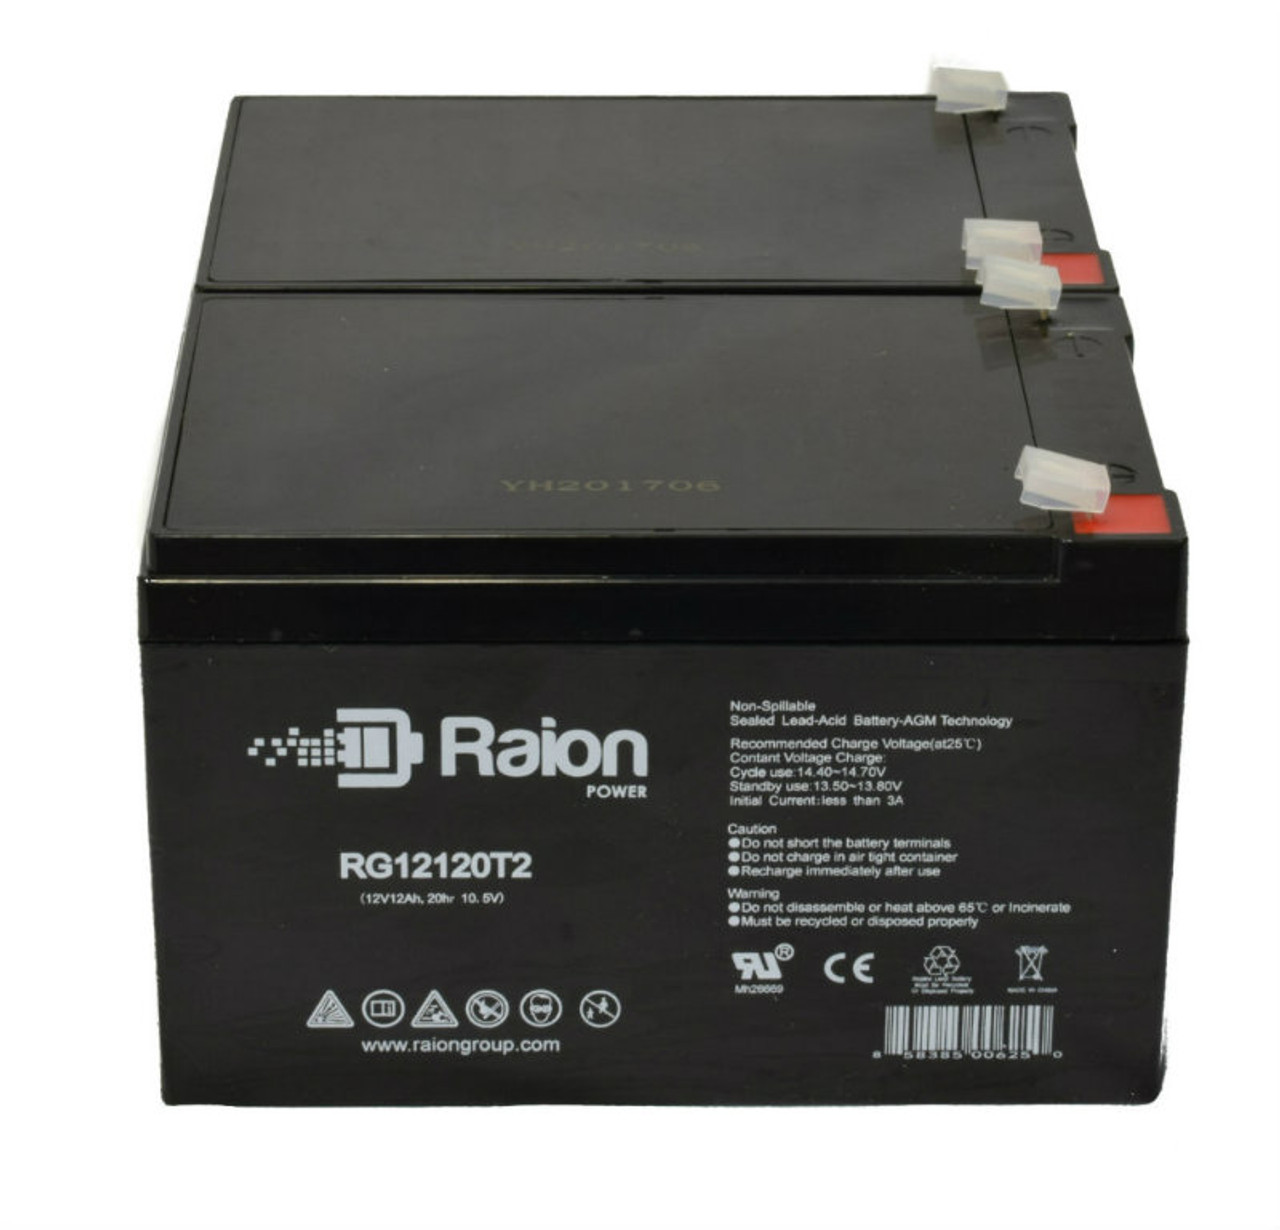 Raion Power 12V 12Ah Non-Spillable Compatible Replacement Battery for Kaiying KS12-12 - (2 Pack)